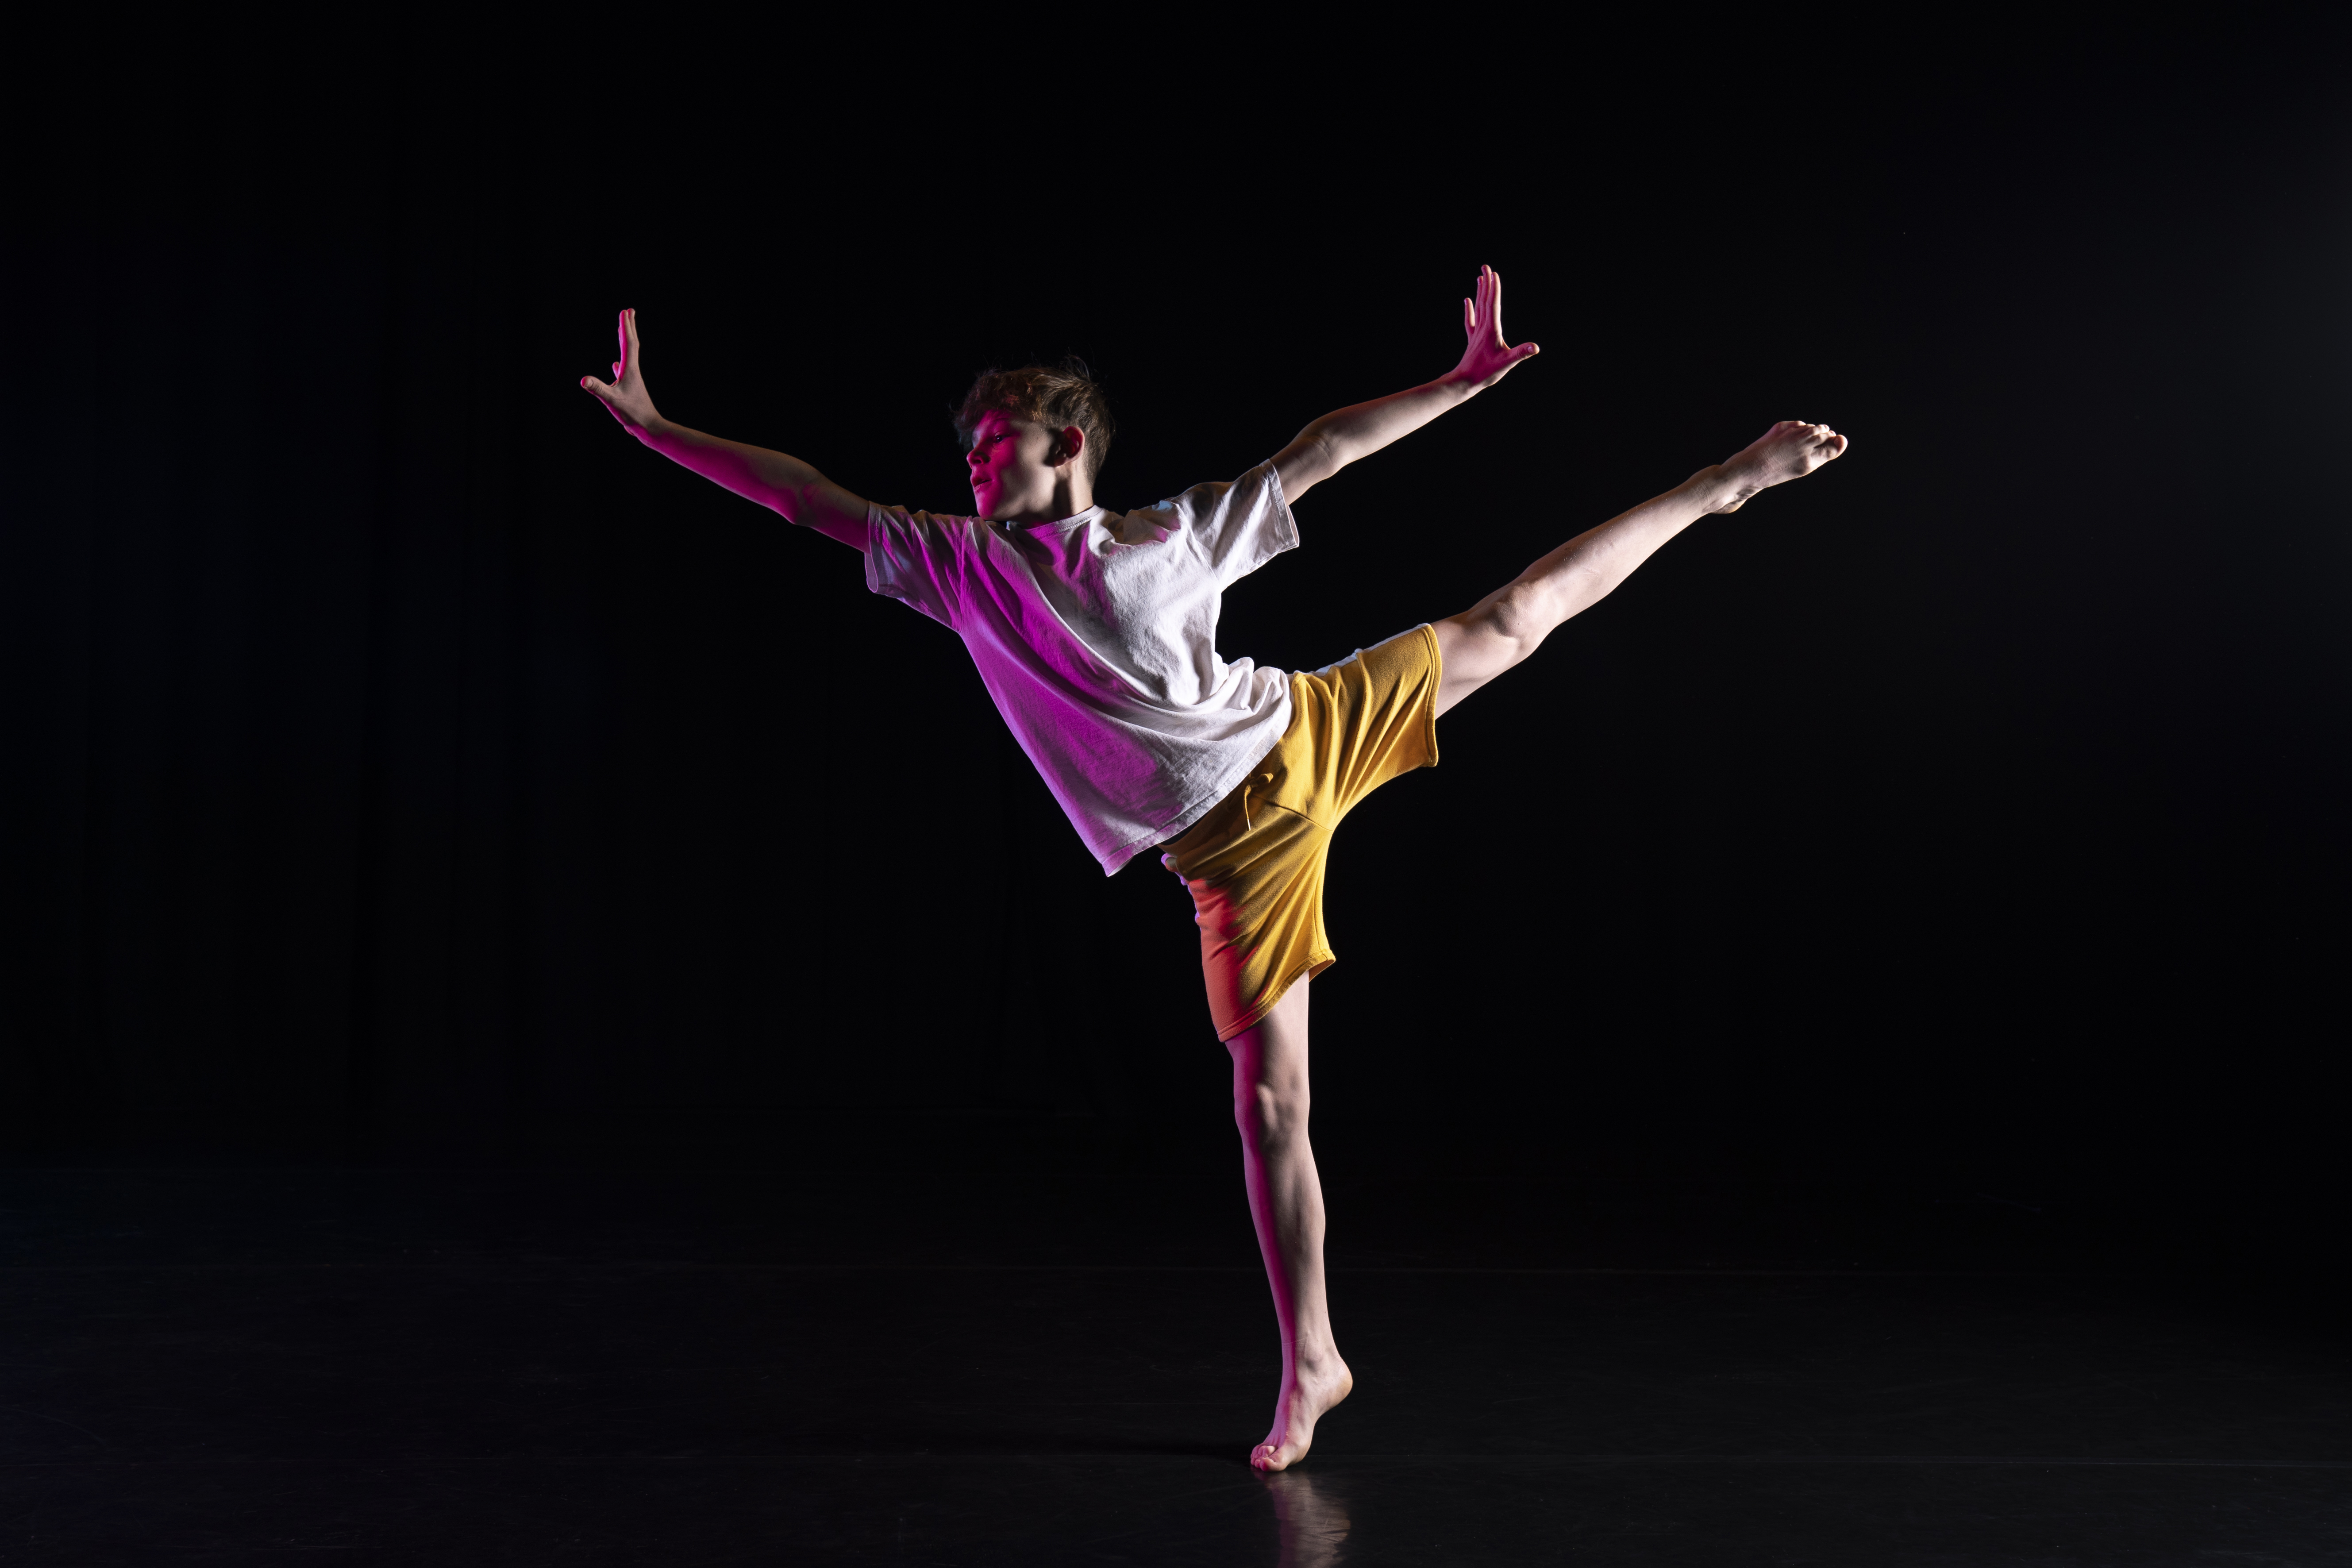 An image from a photoshoot. One male student is balancing on one leg whist reaching all his limbs away from his body. He is again a black background.